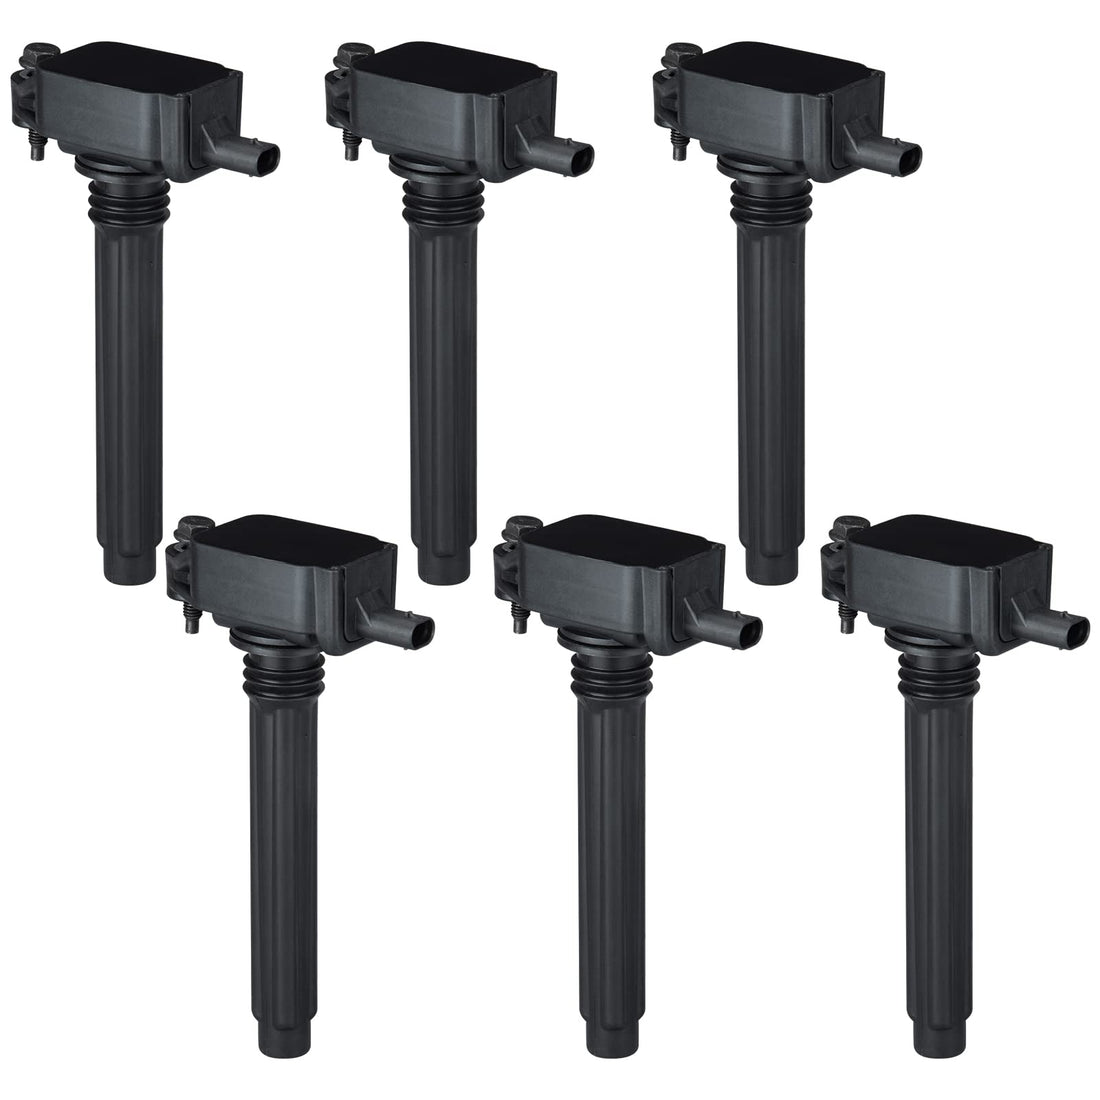 6-Pack Ignition Coils for Chrysler, Dodge & Jeep Vehicles